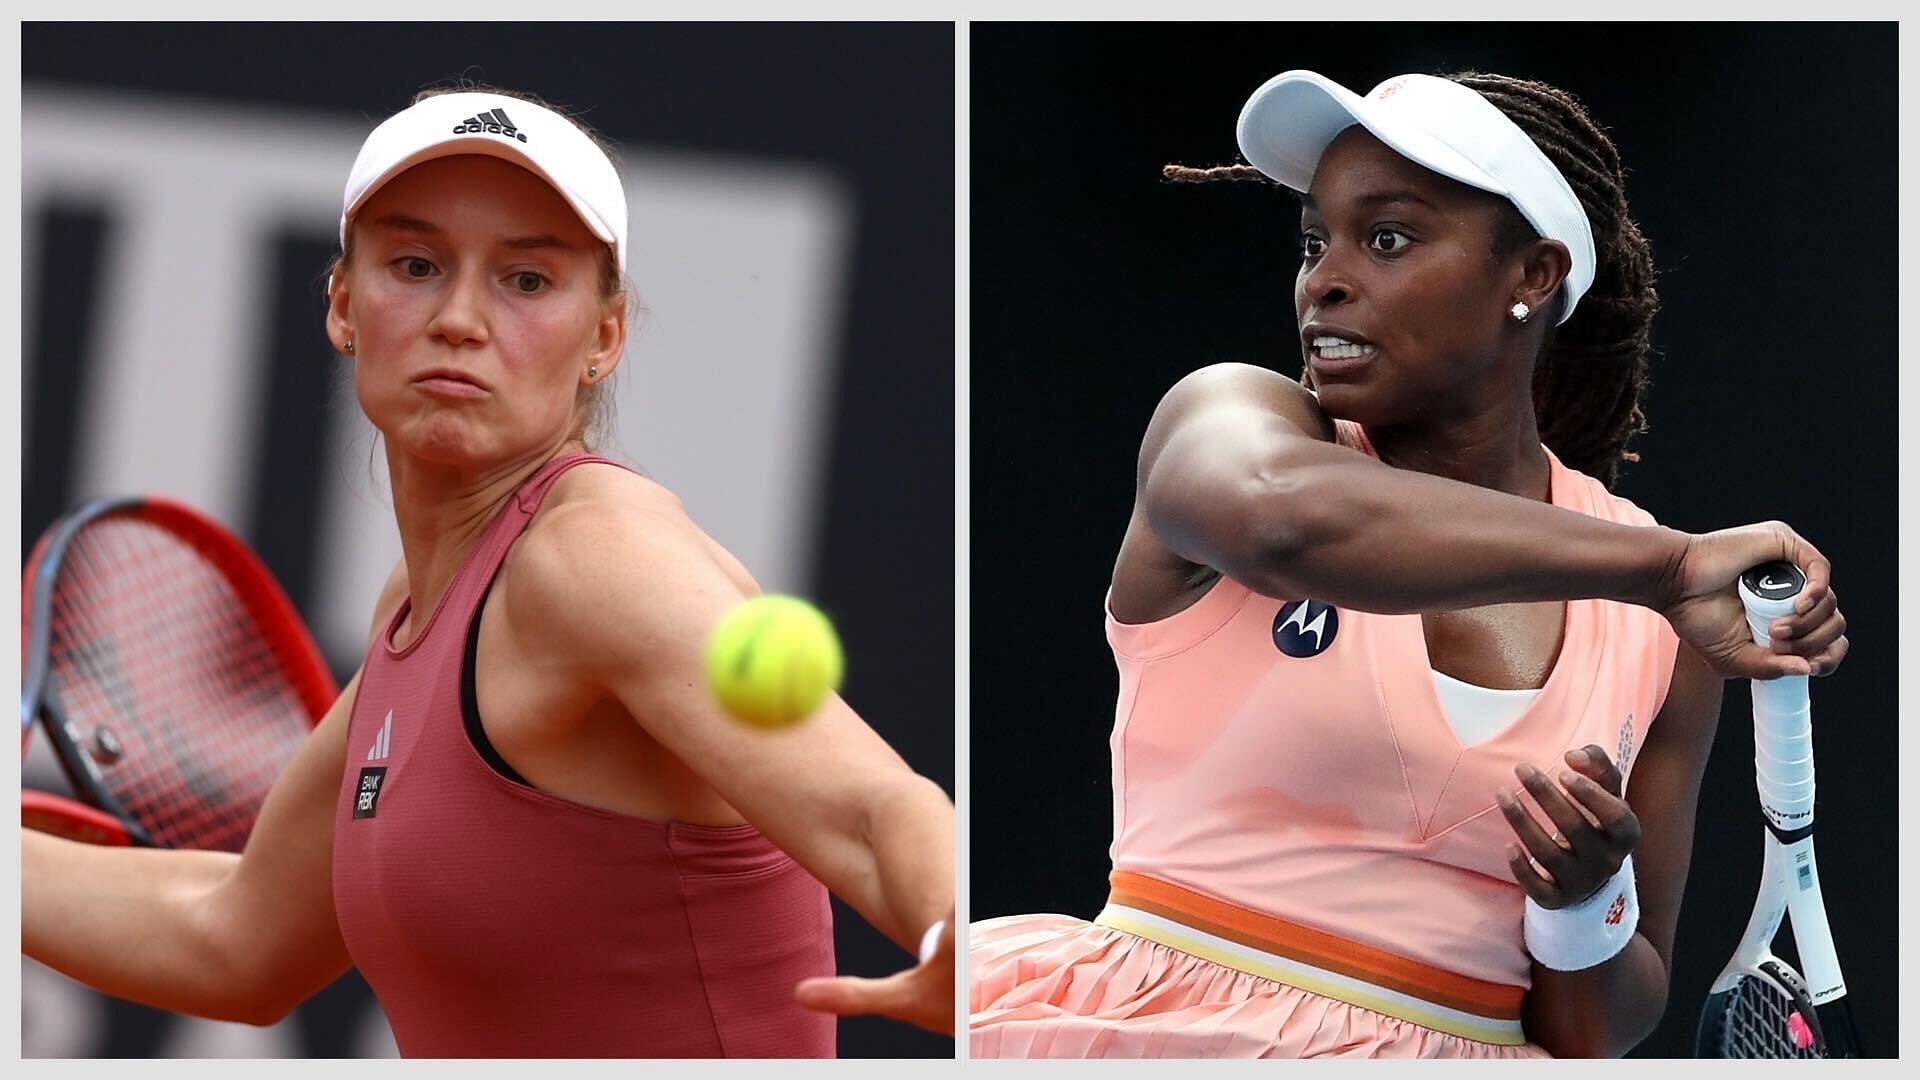 Elena Rybakina vs Sloane Stephens is one of the second-round matches at the 2023 Canadian Open.